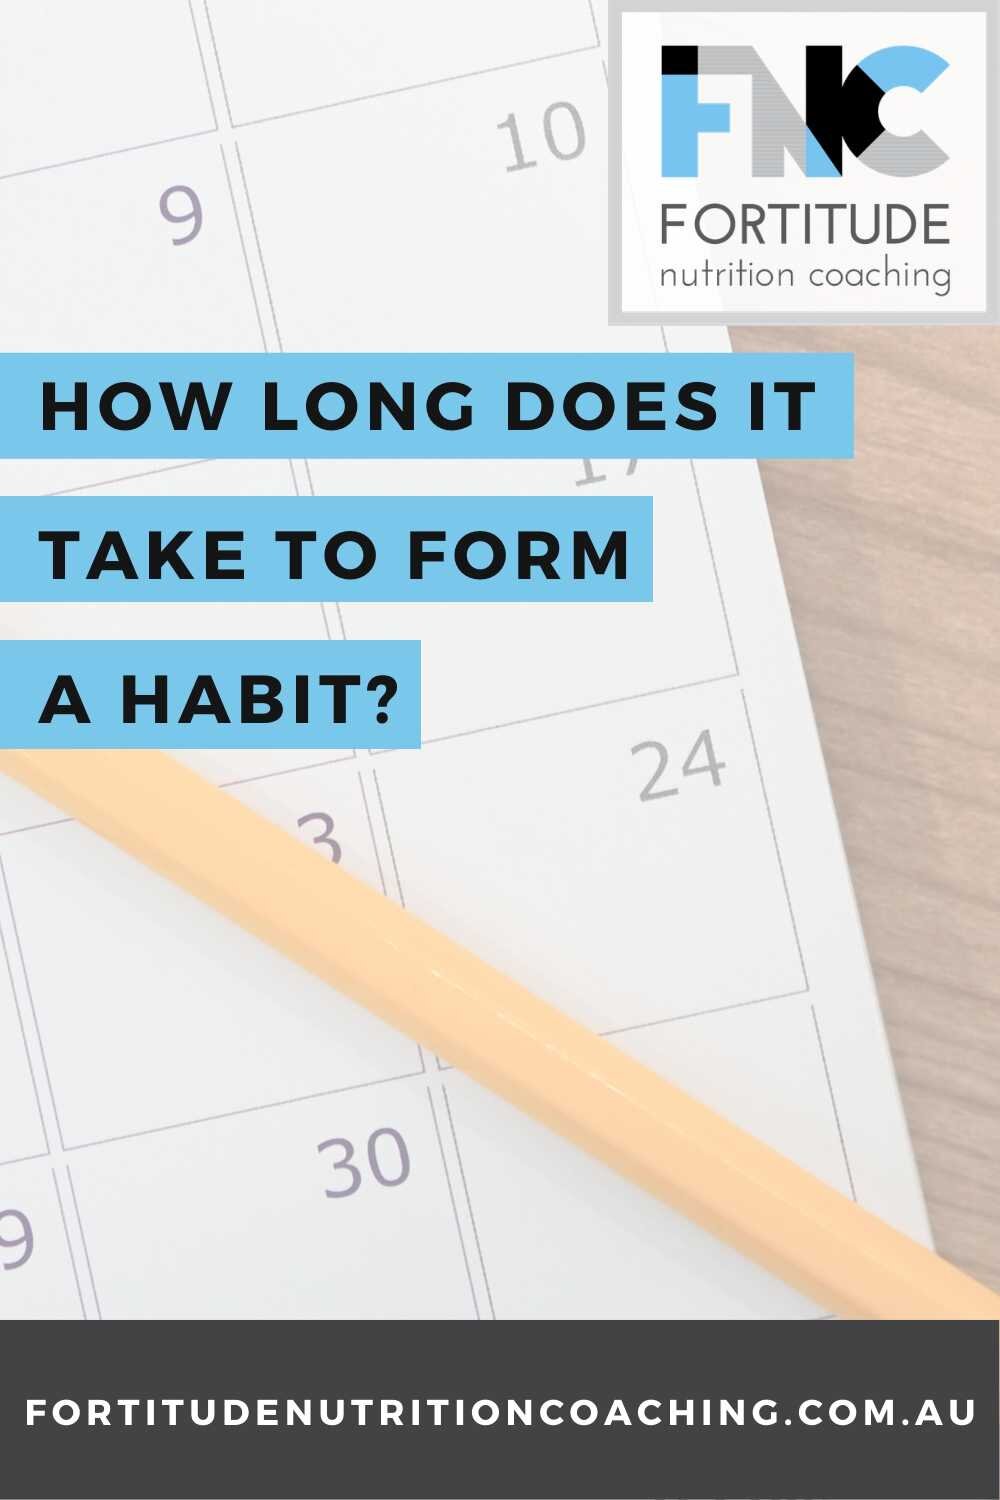 How Long Does it Take to Form a Habit?